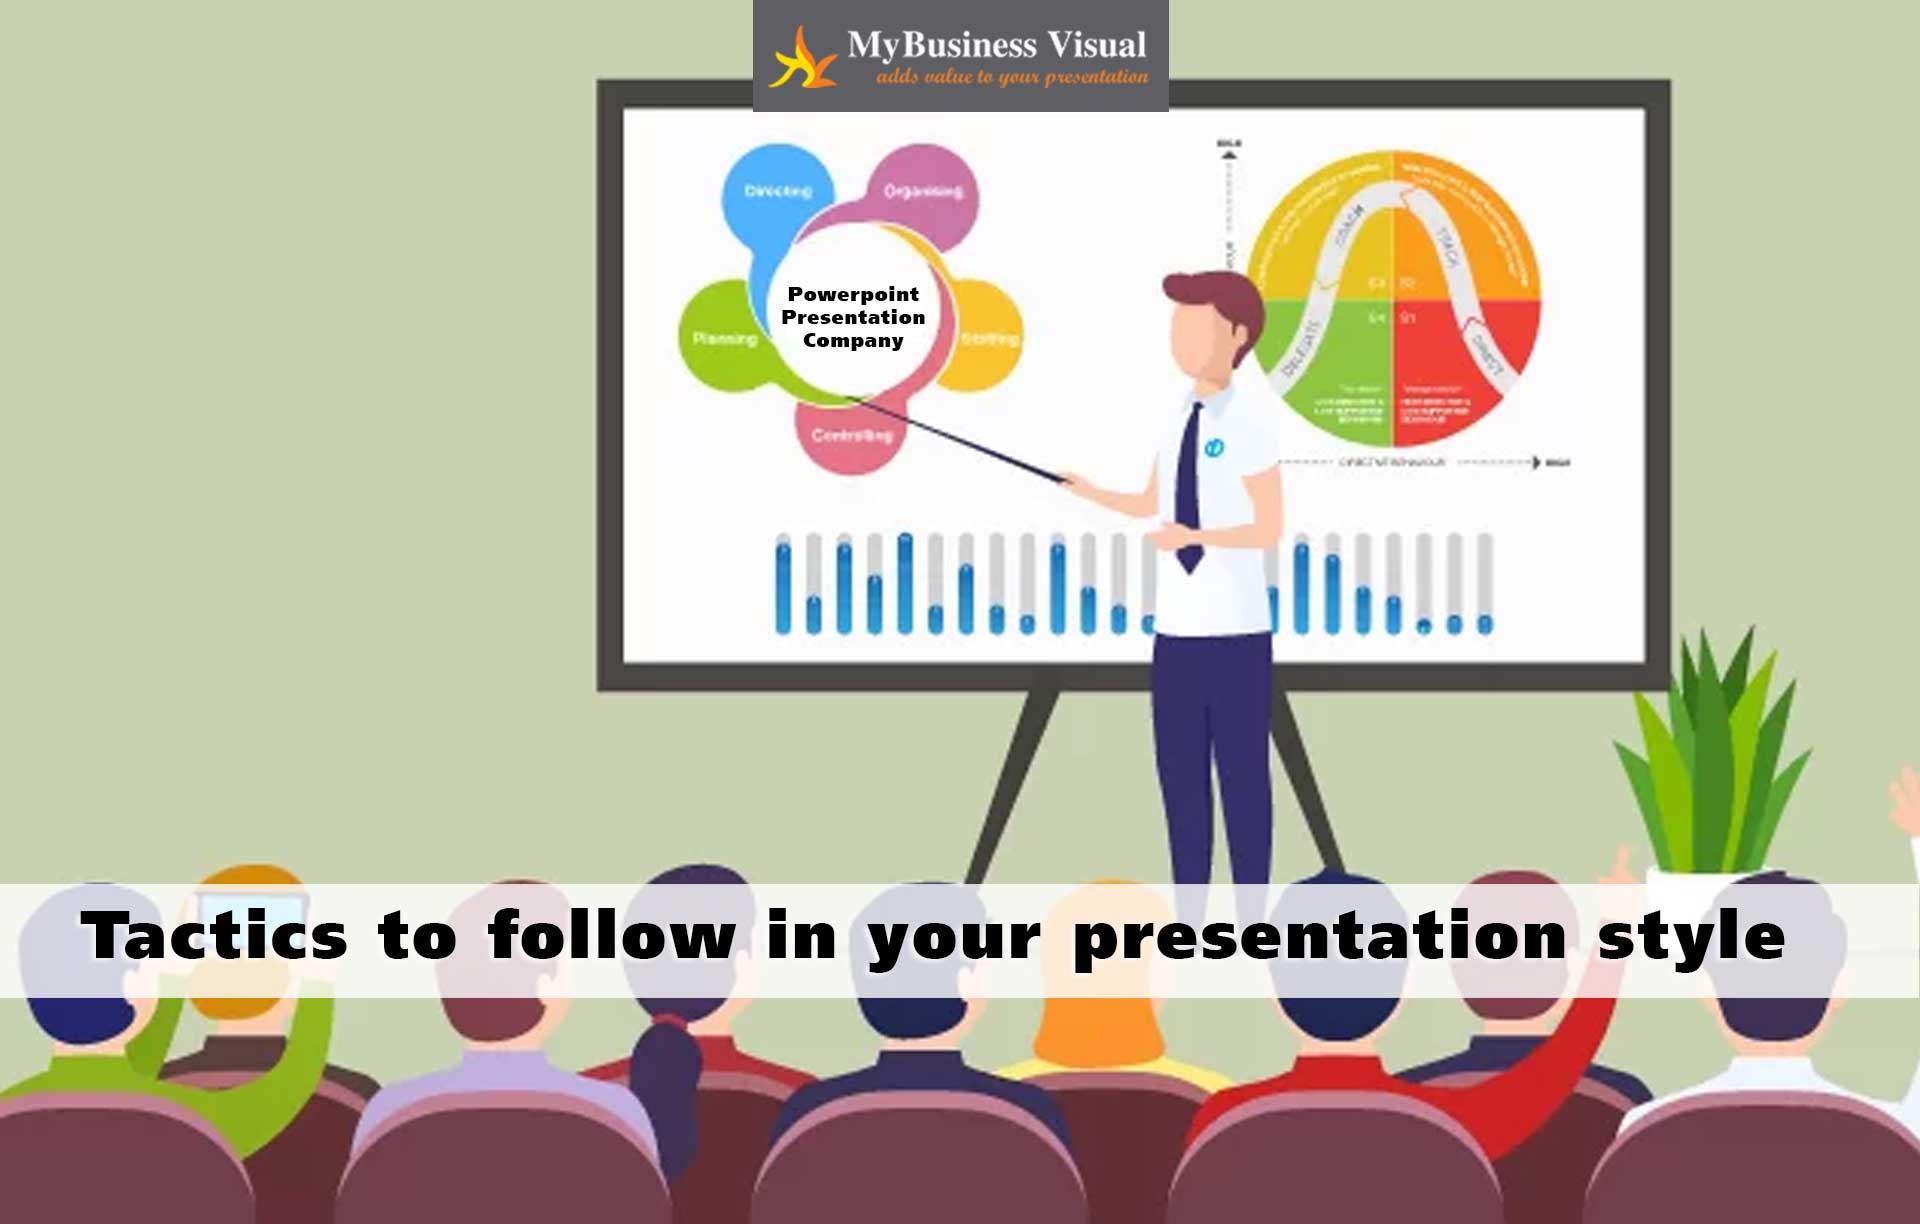 Tactics to Follow in your Presentation Style